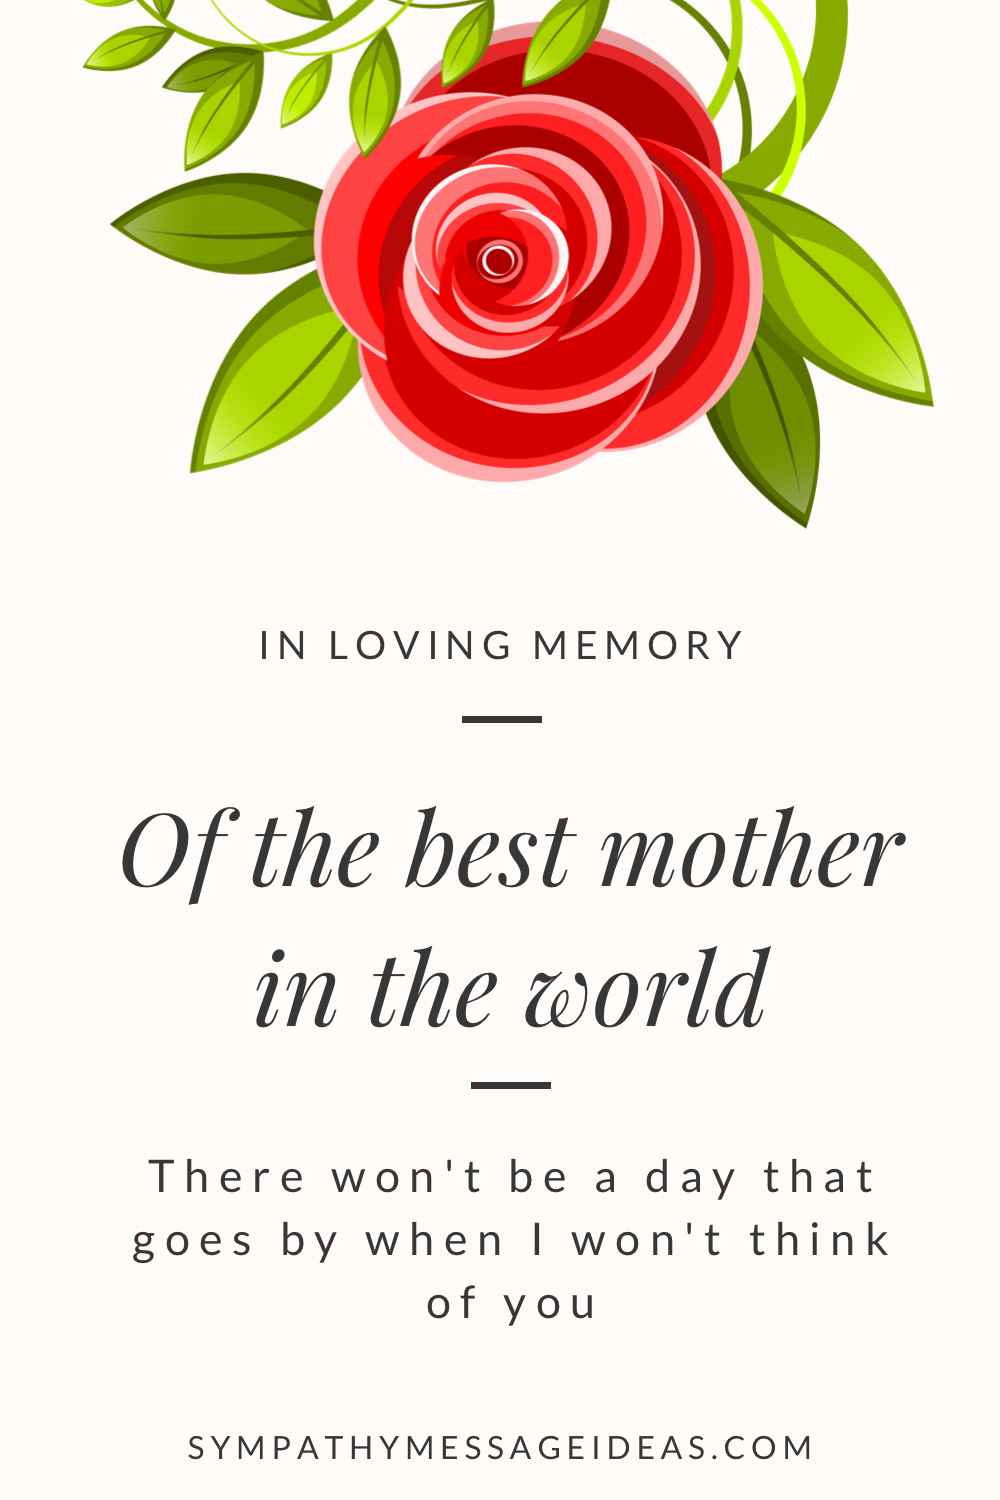 funeral message for mom